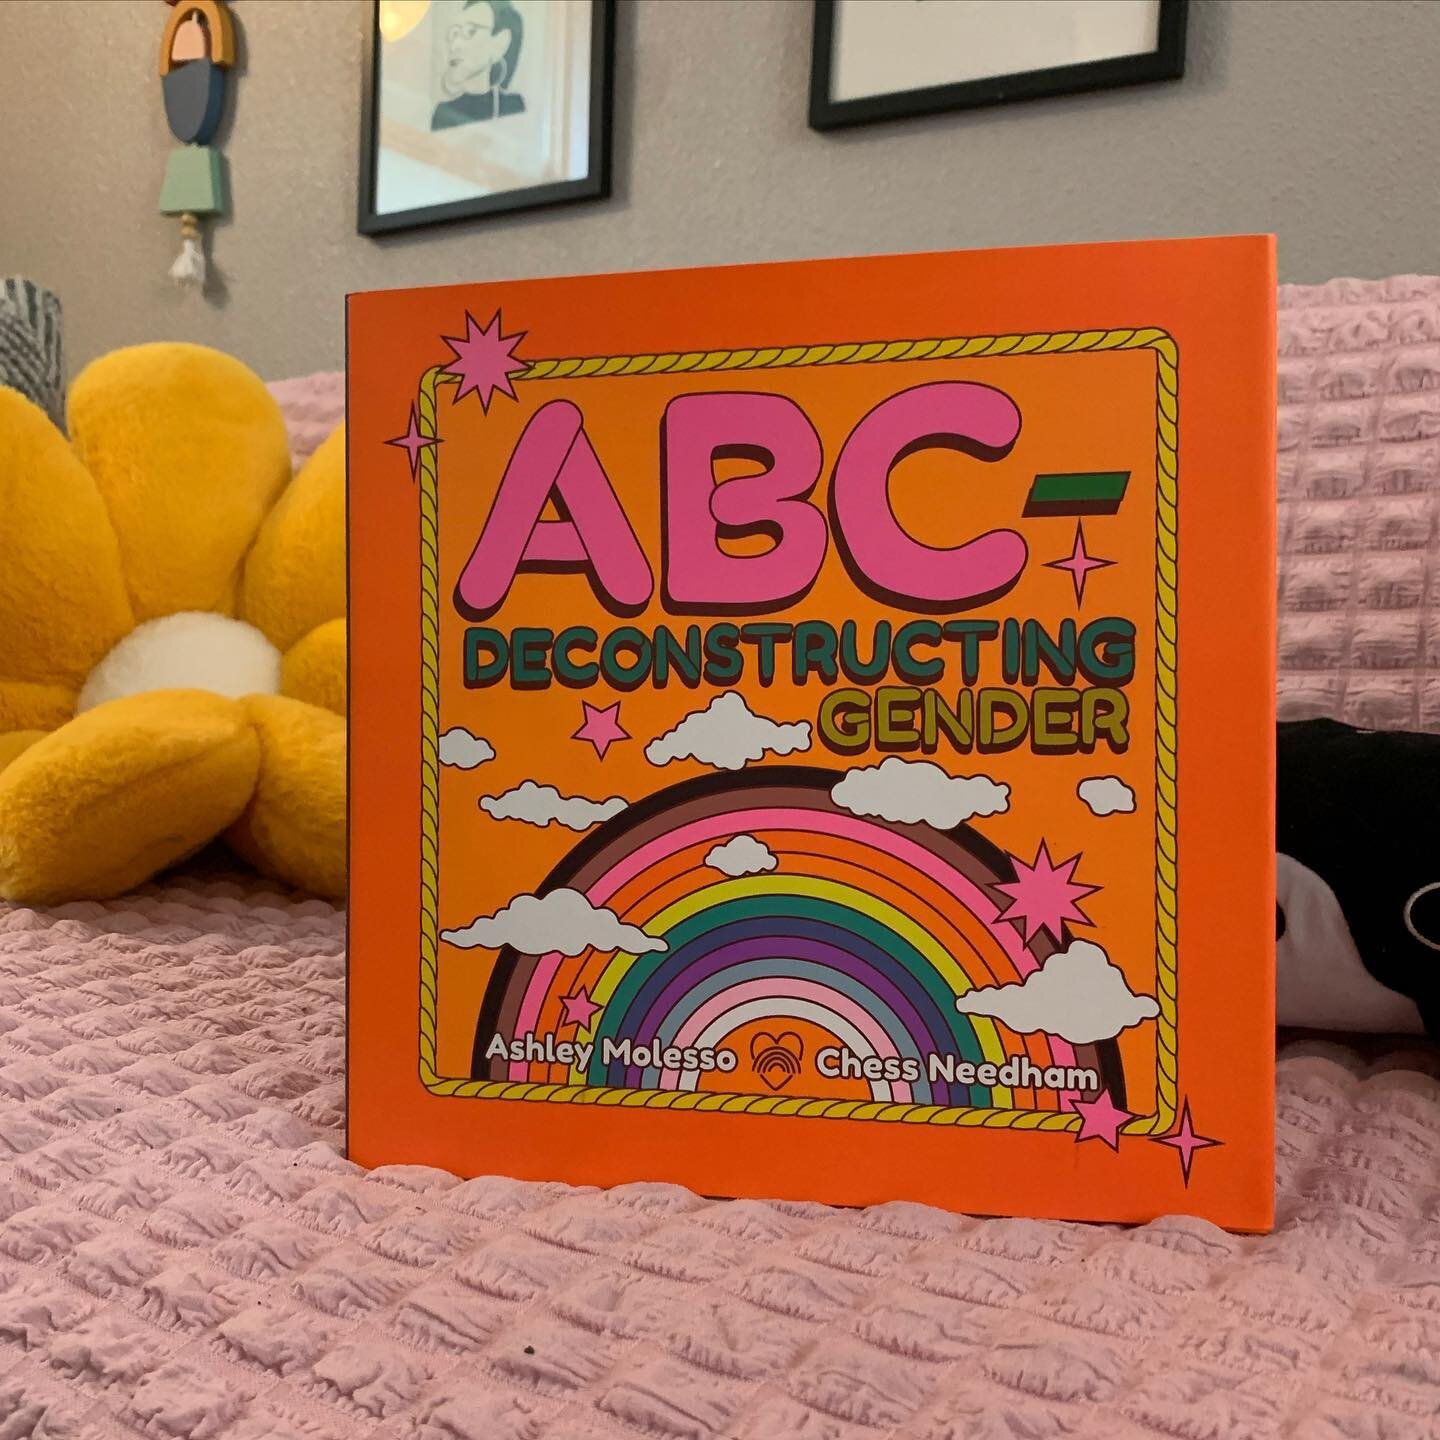 Todays new book highlight! We love ABC-deconstructing Gender by @ashandchess ! The art is bright and stunning. We love having books like this to read to our toddler that show all kinds of people, bodies, abilities, races, and gender expressions. 

#b